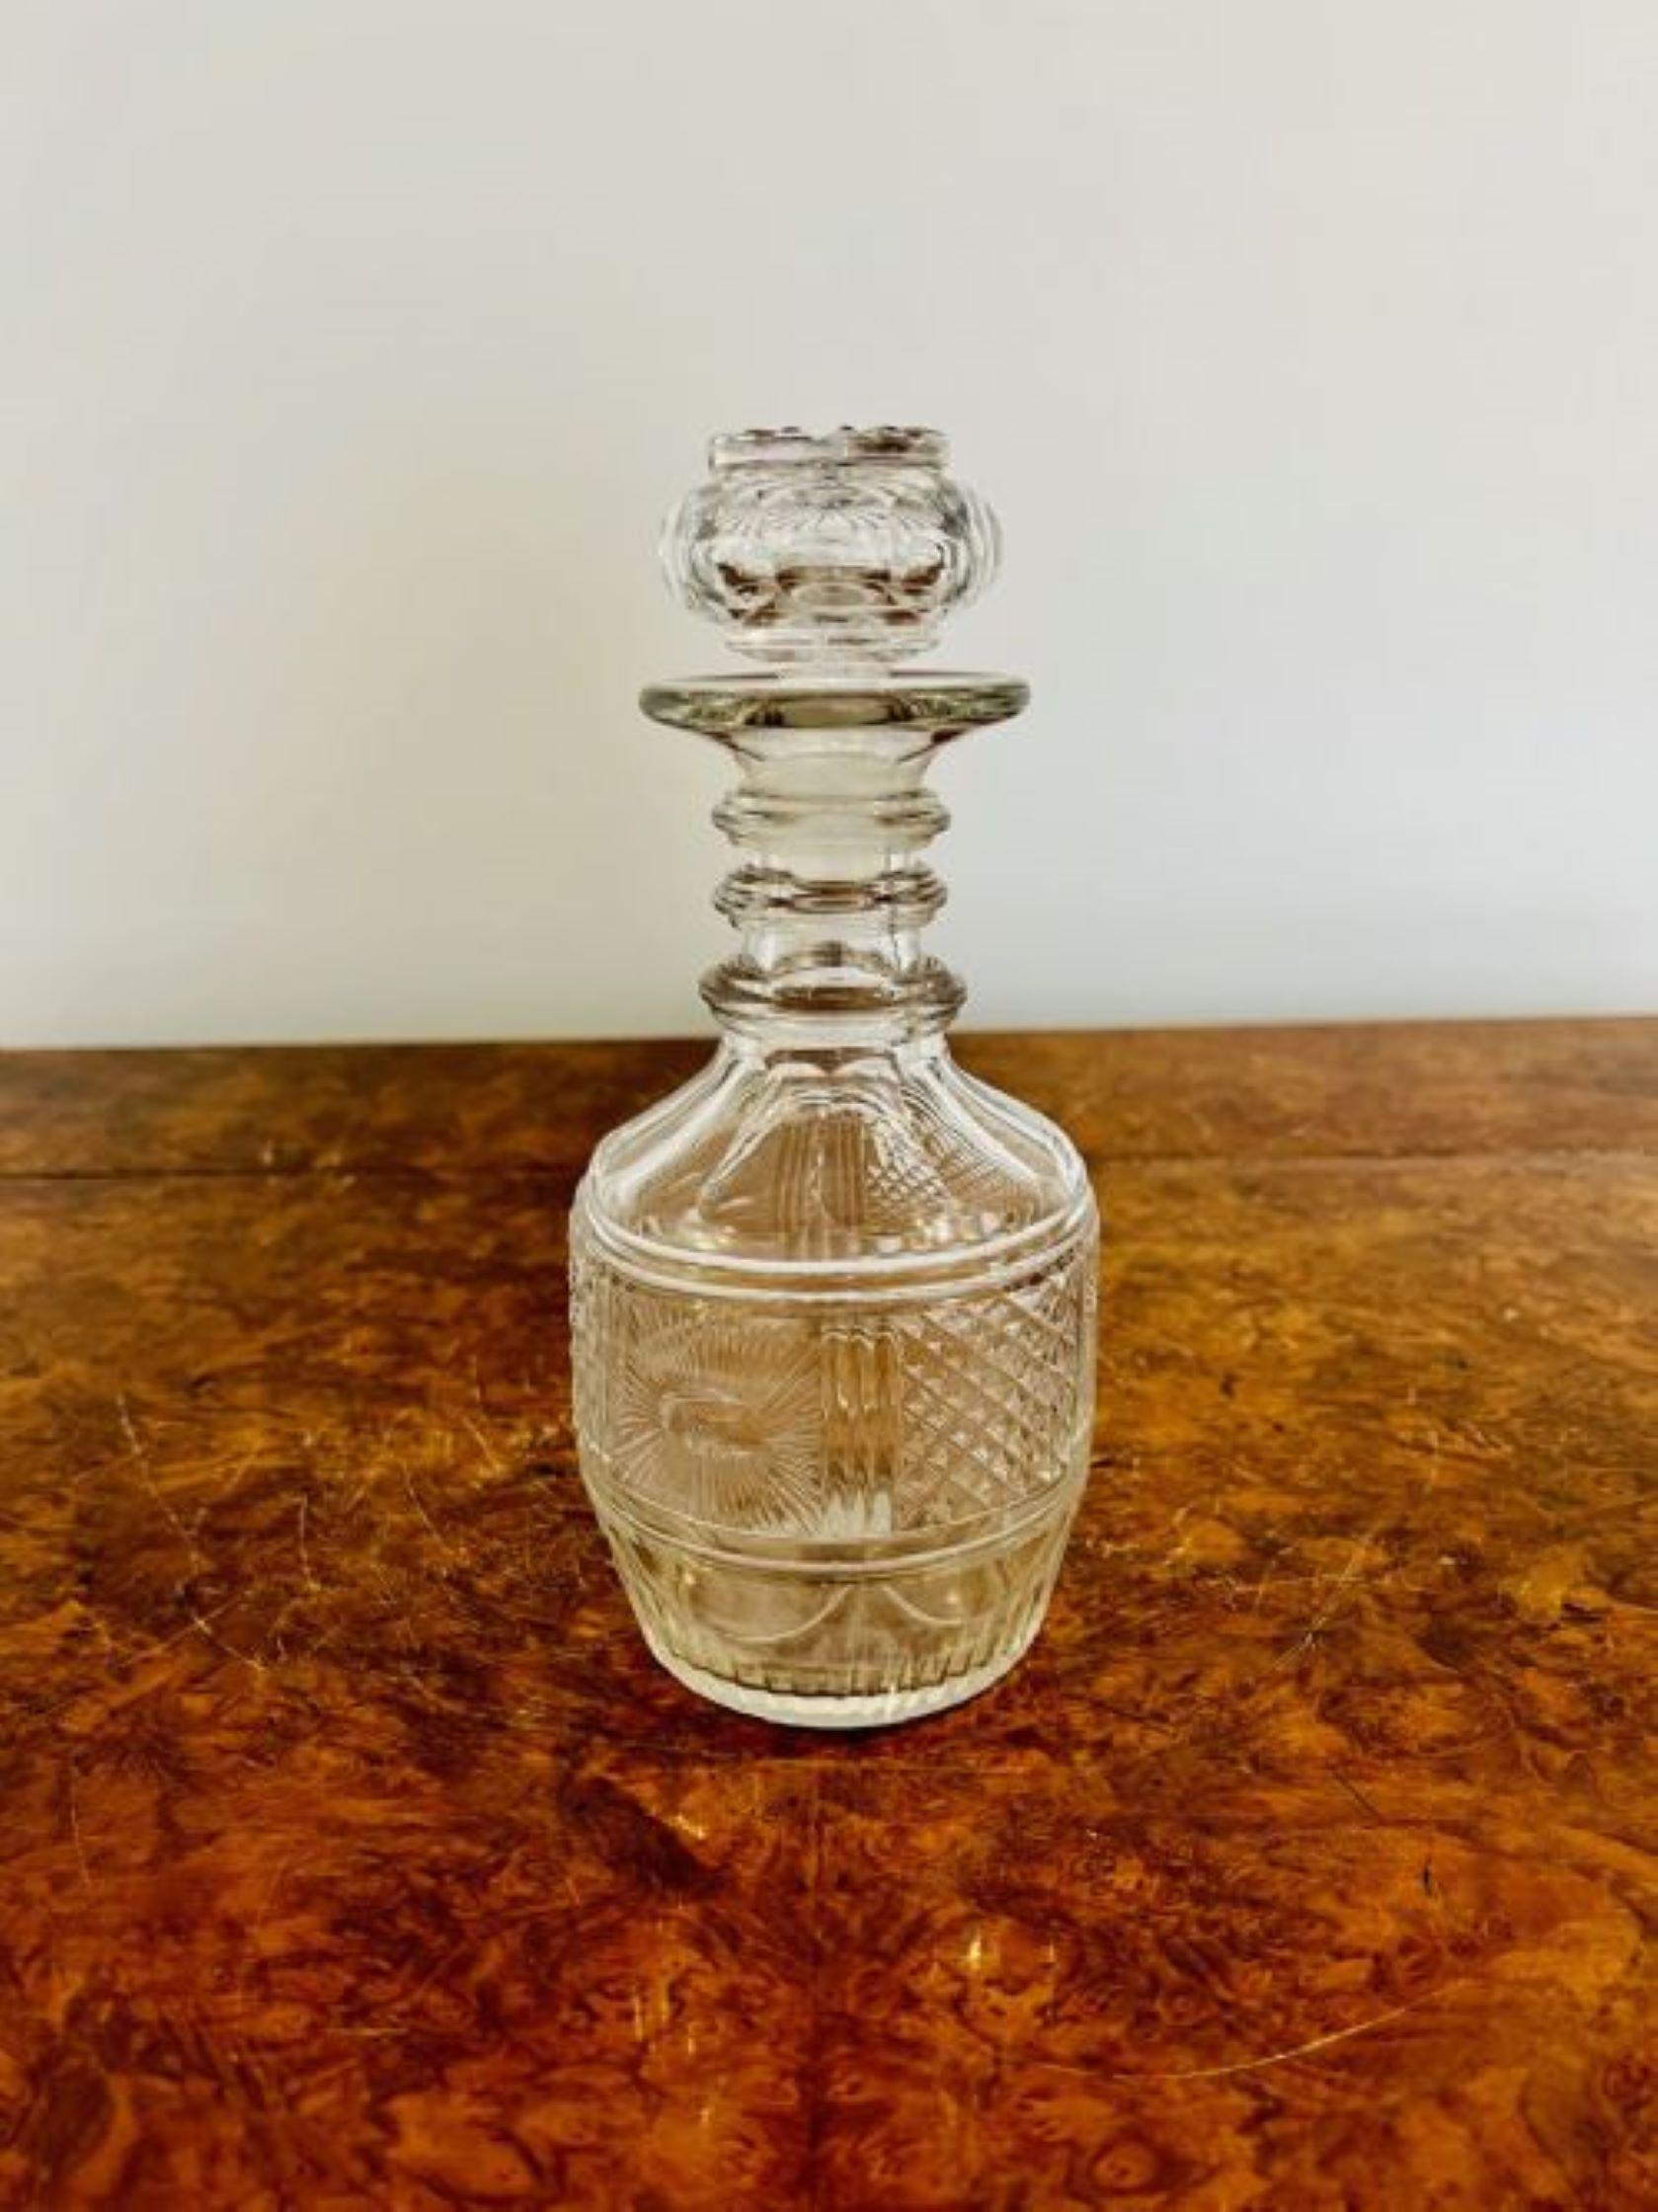 Quality antique George III cut glass decanter, having a quality cut glass stopper above a shaped cut glass decanter with three glass rings to the neck.